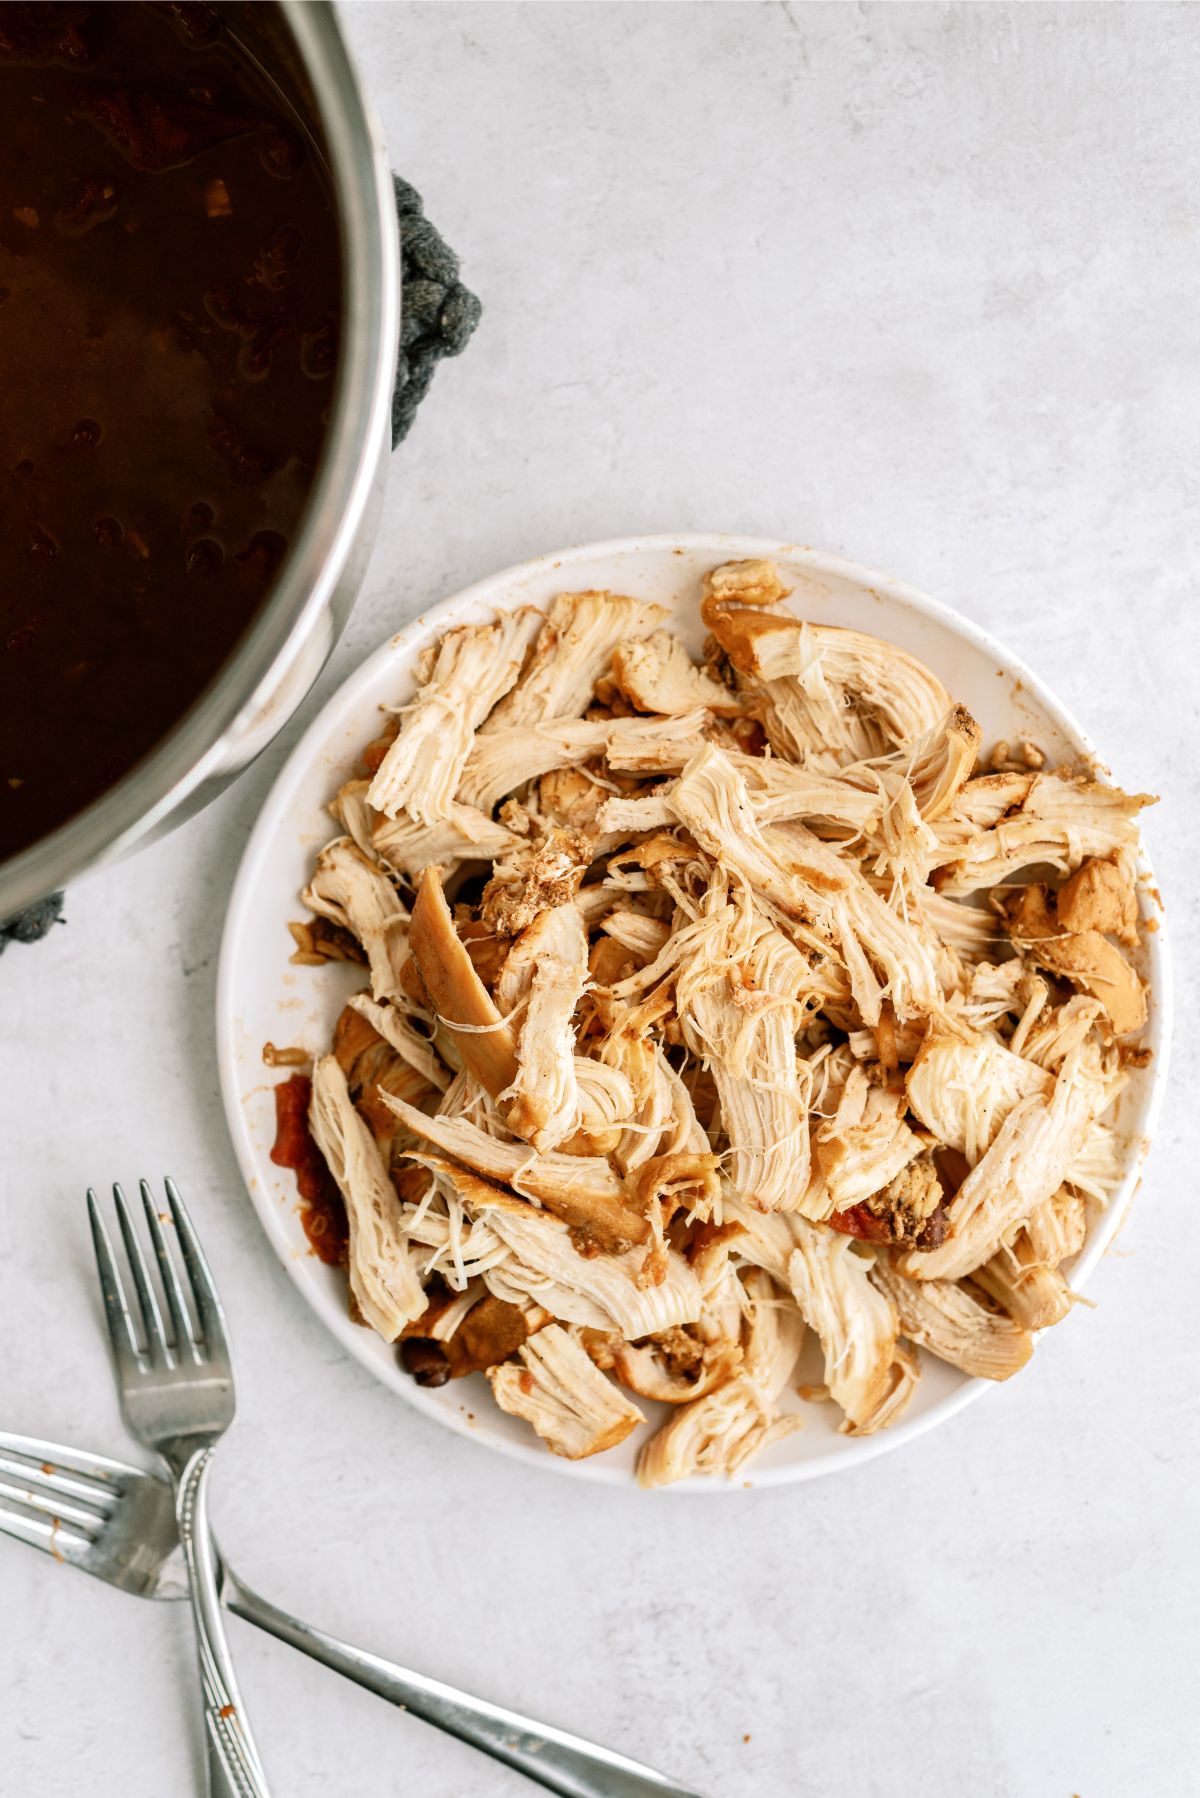 Chicken removed from Instant Pot and shredded